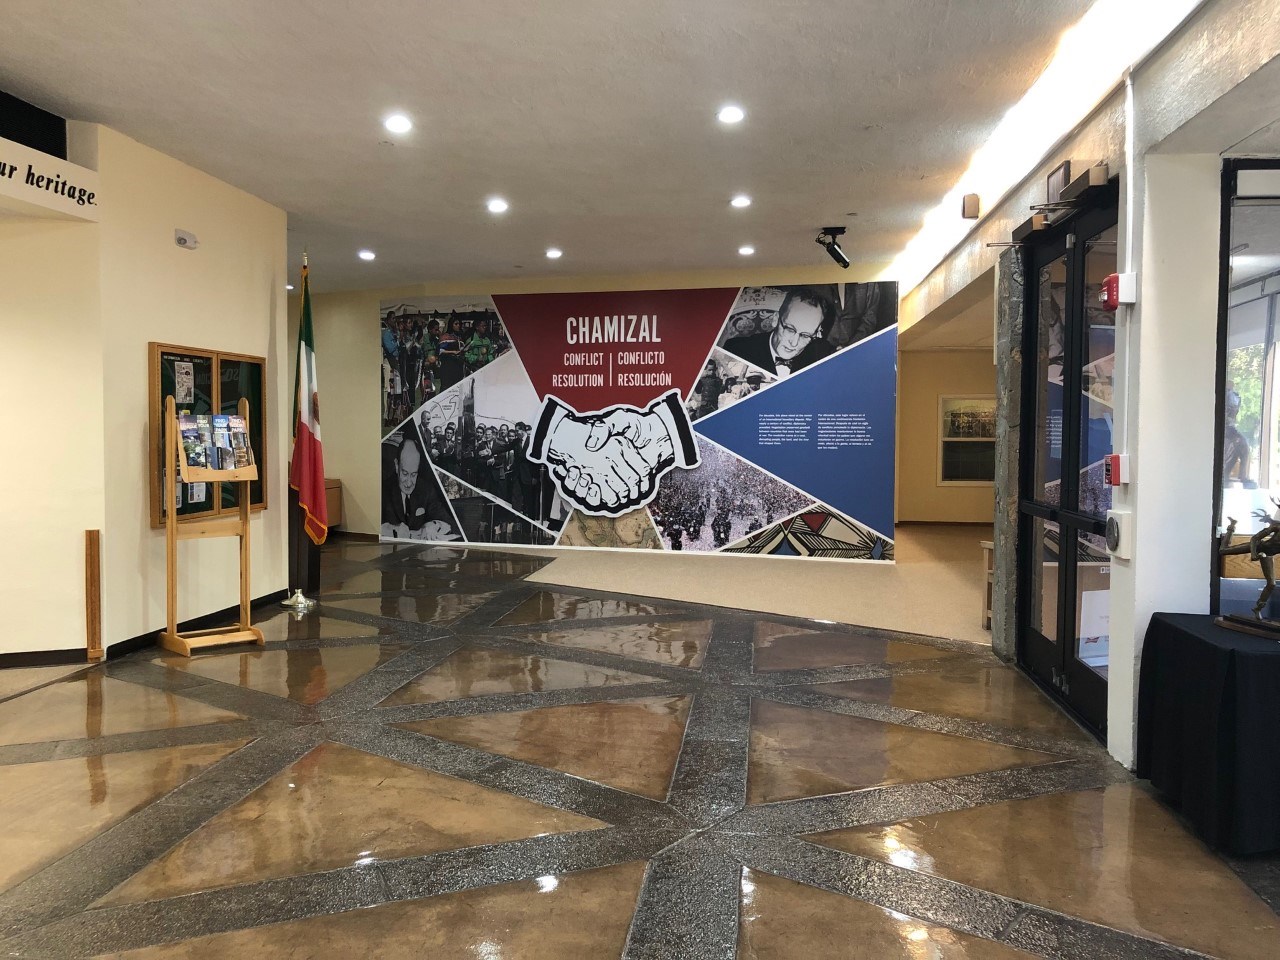 A wall mural with a collage of images marks the exhibit entrance across an open lobby.